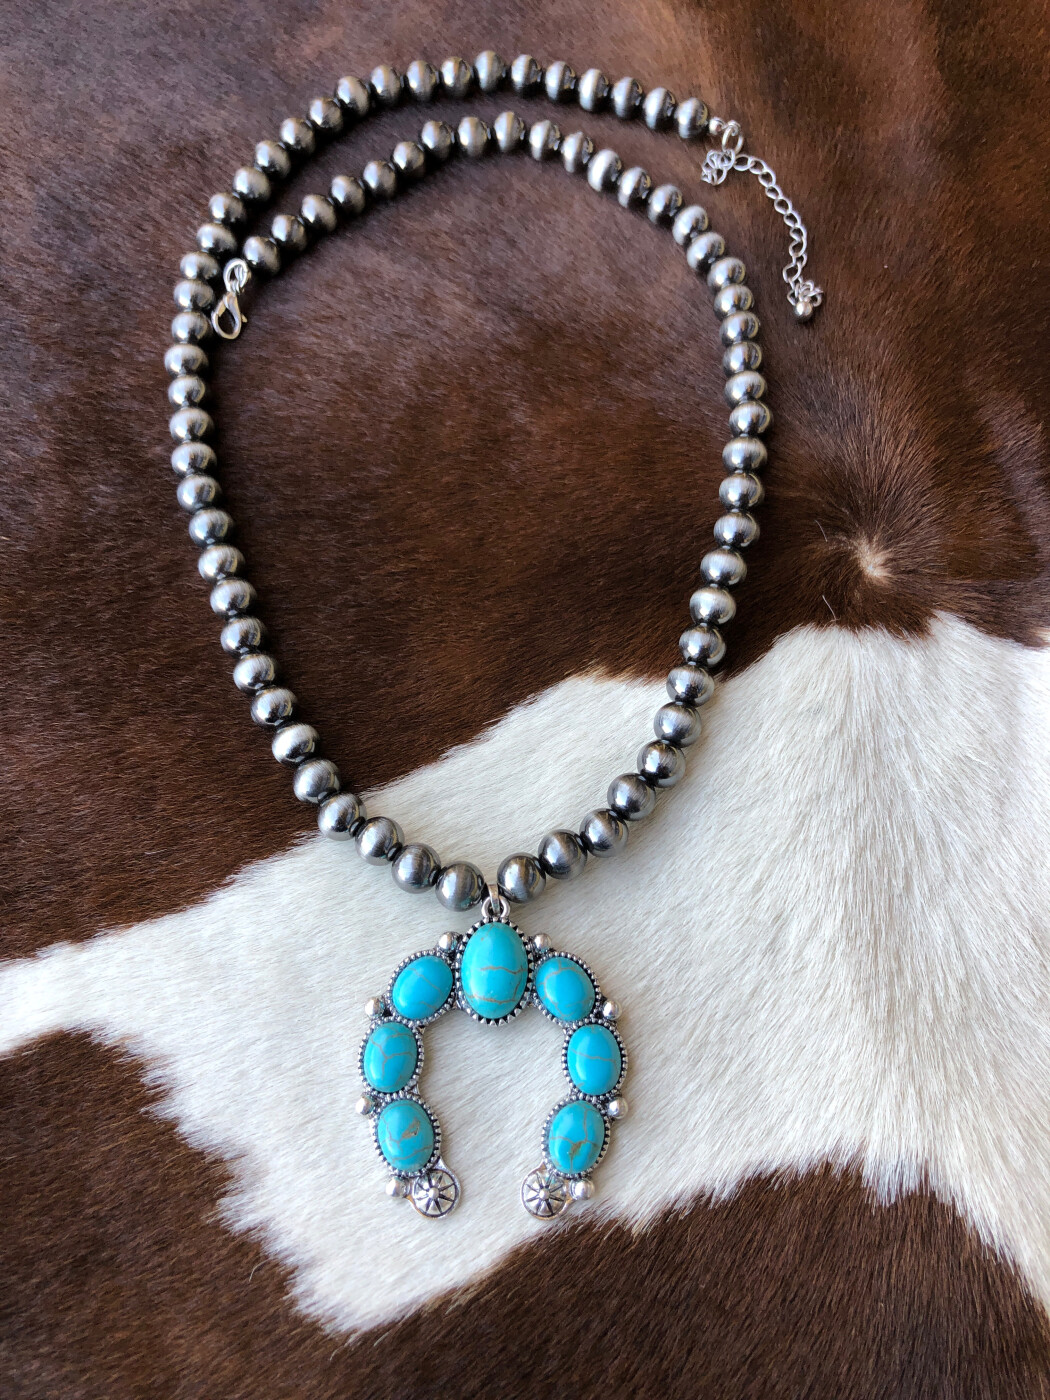 Navajo Beaded Necklace by Rena Charles - Hoel's Indian Shop